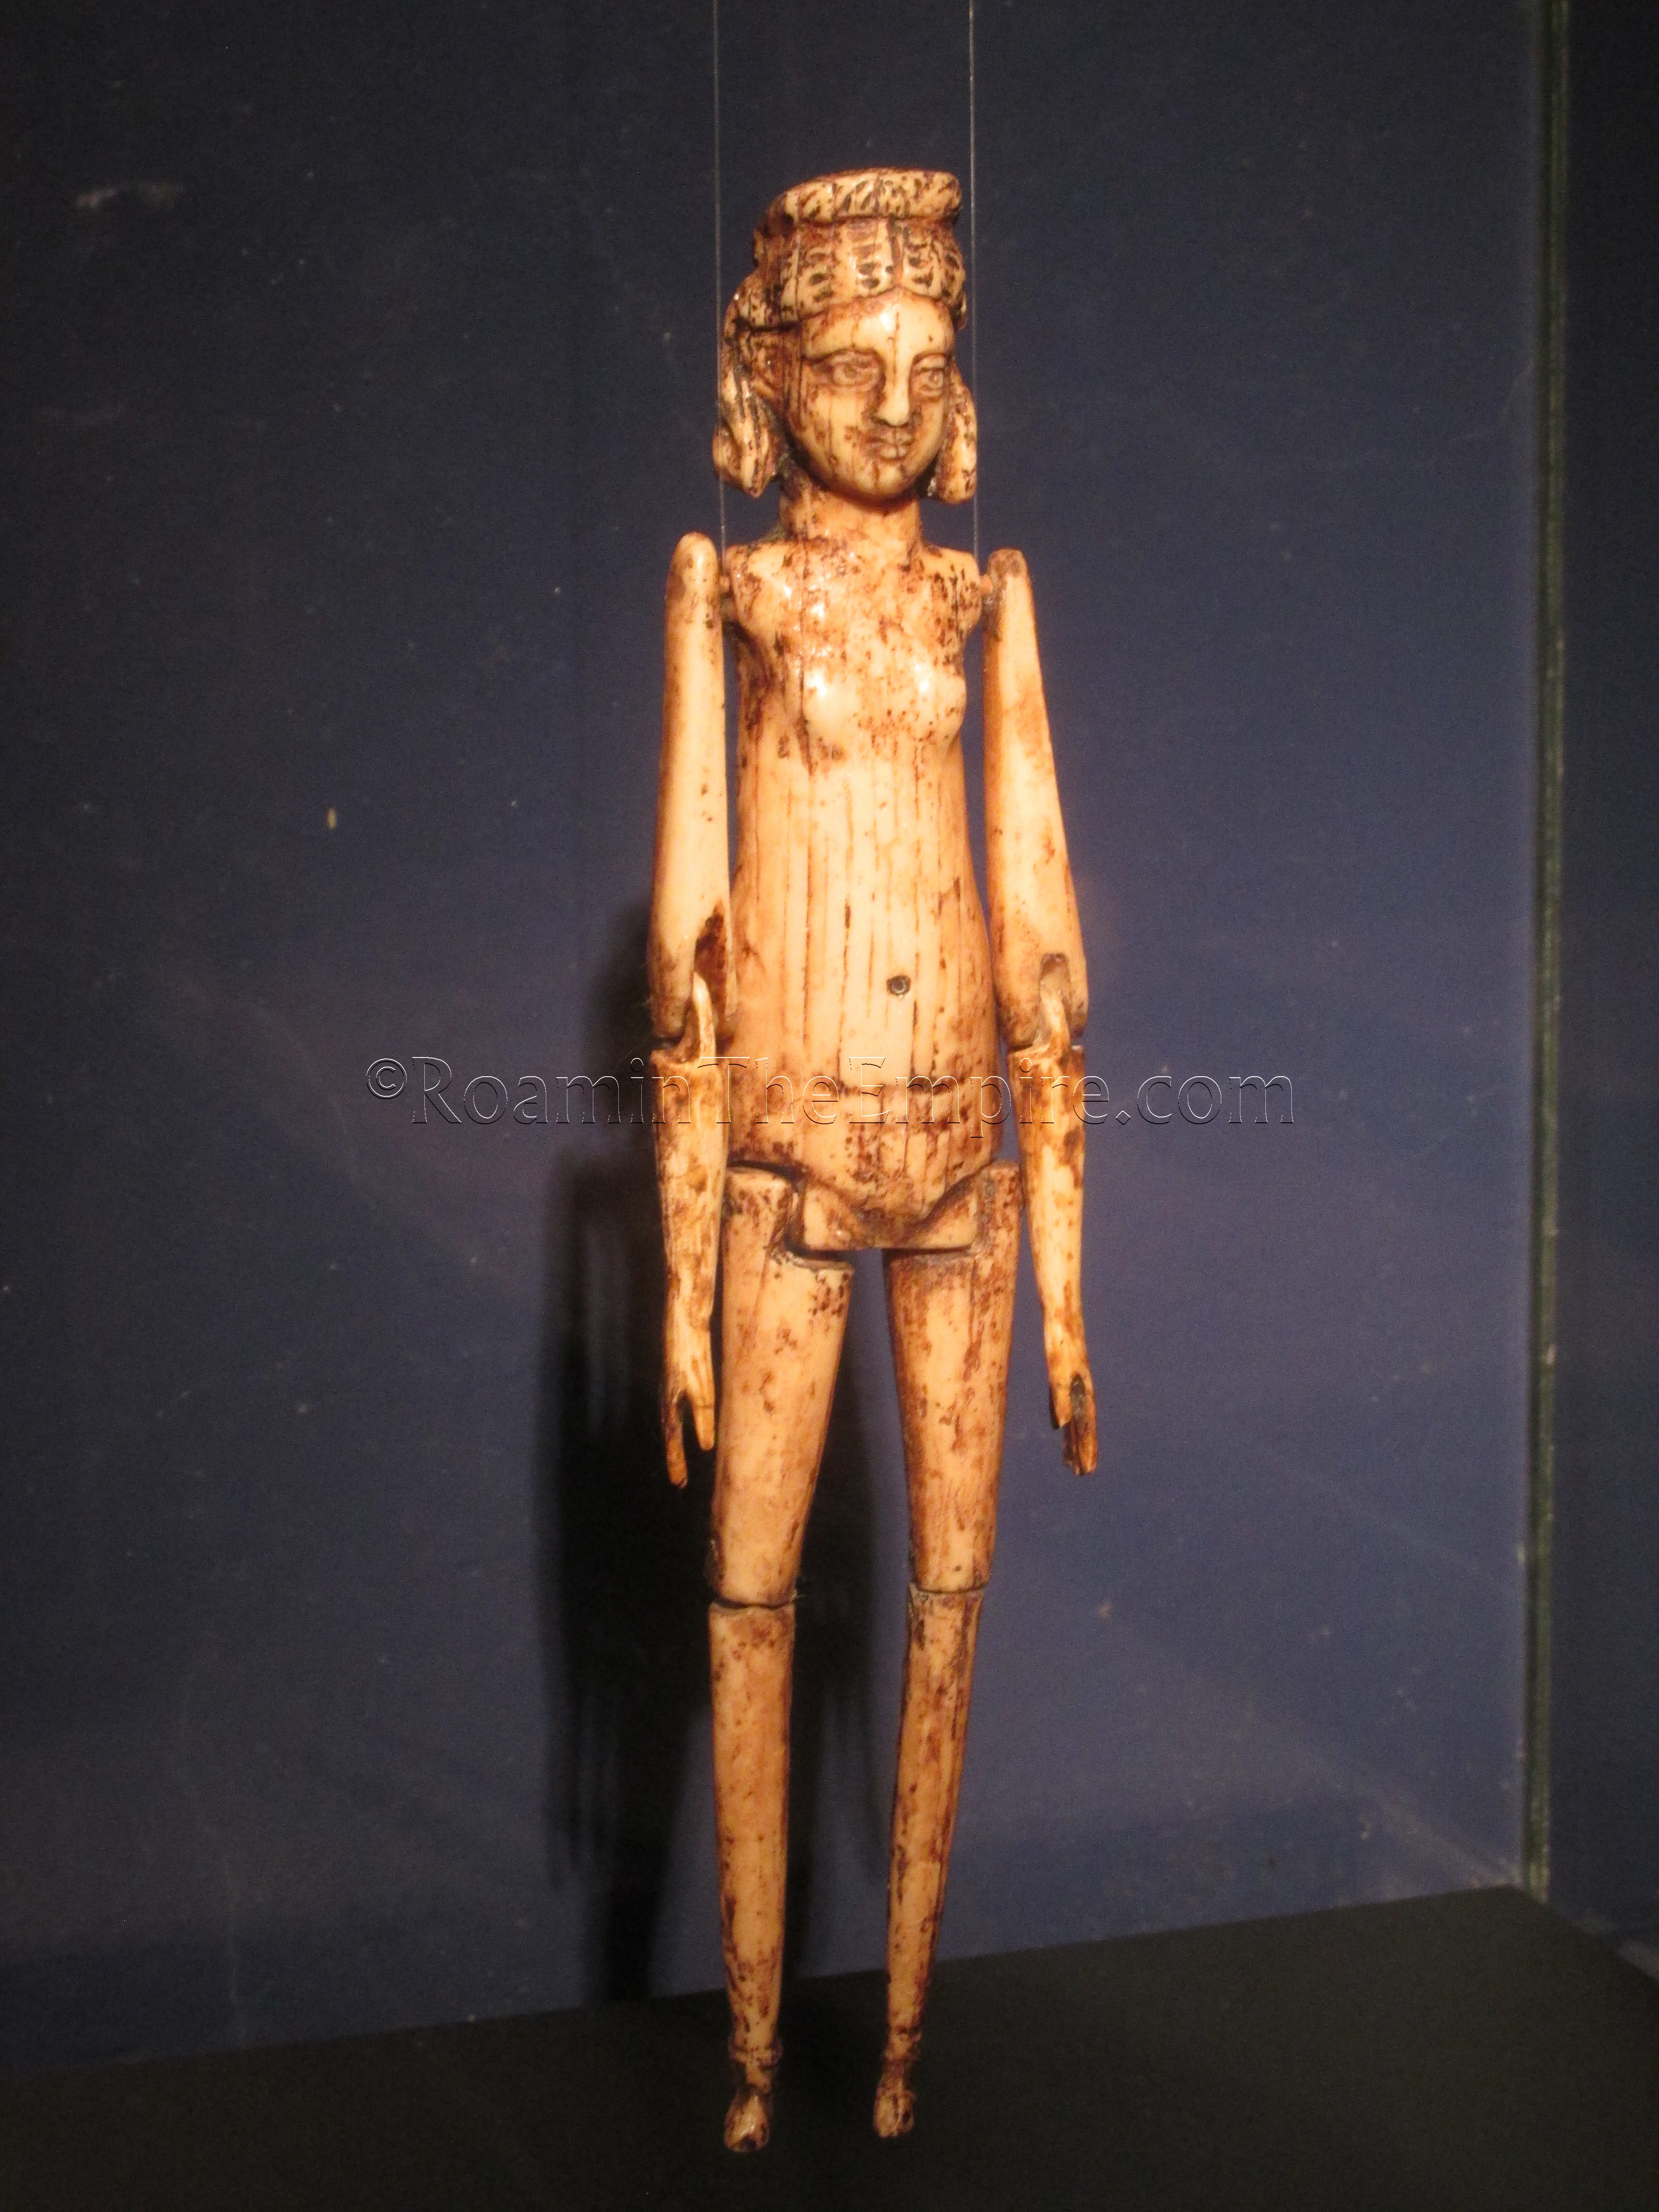 Ivory doll found in the necropolis, displayed at the site museum.